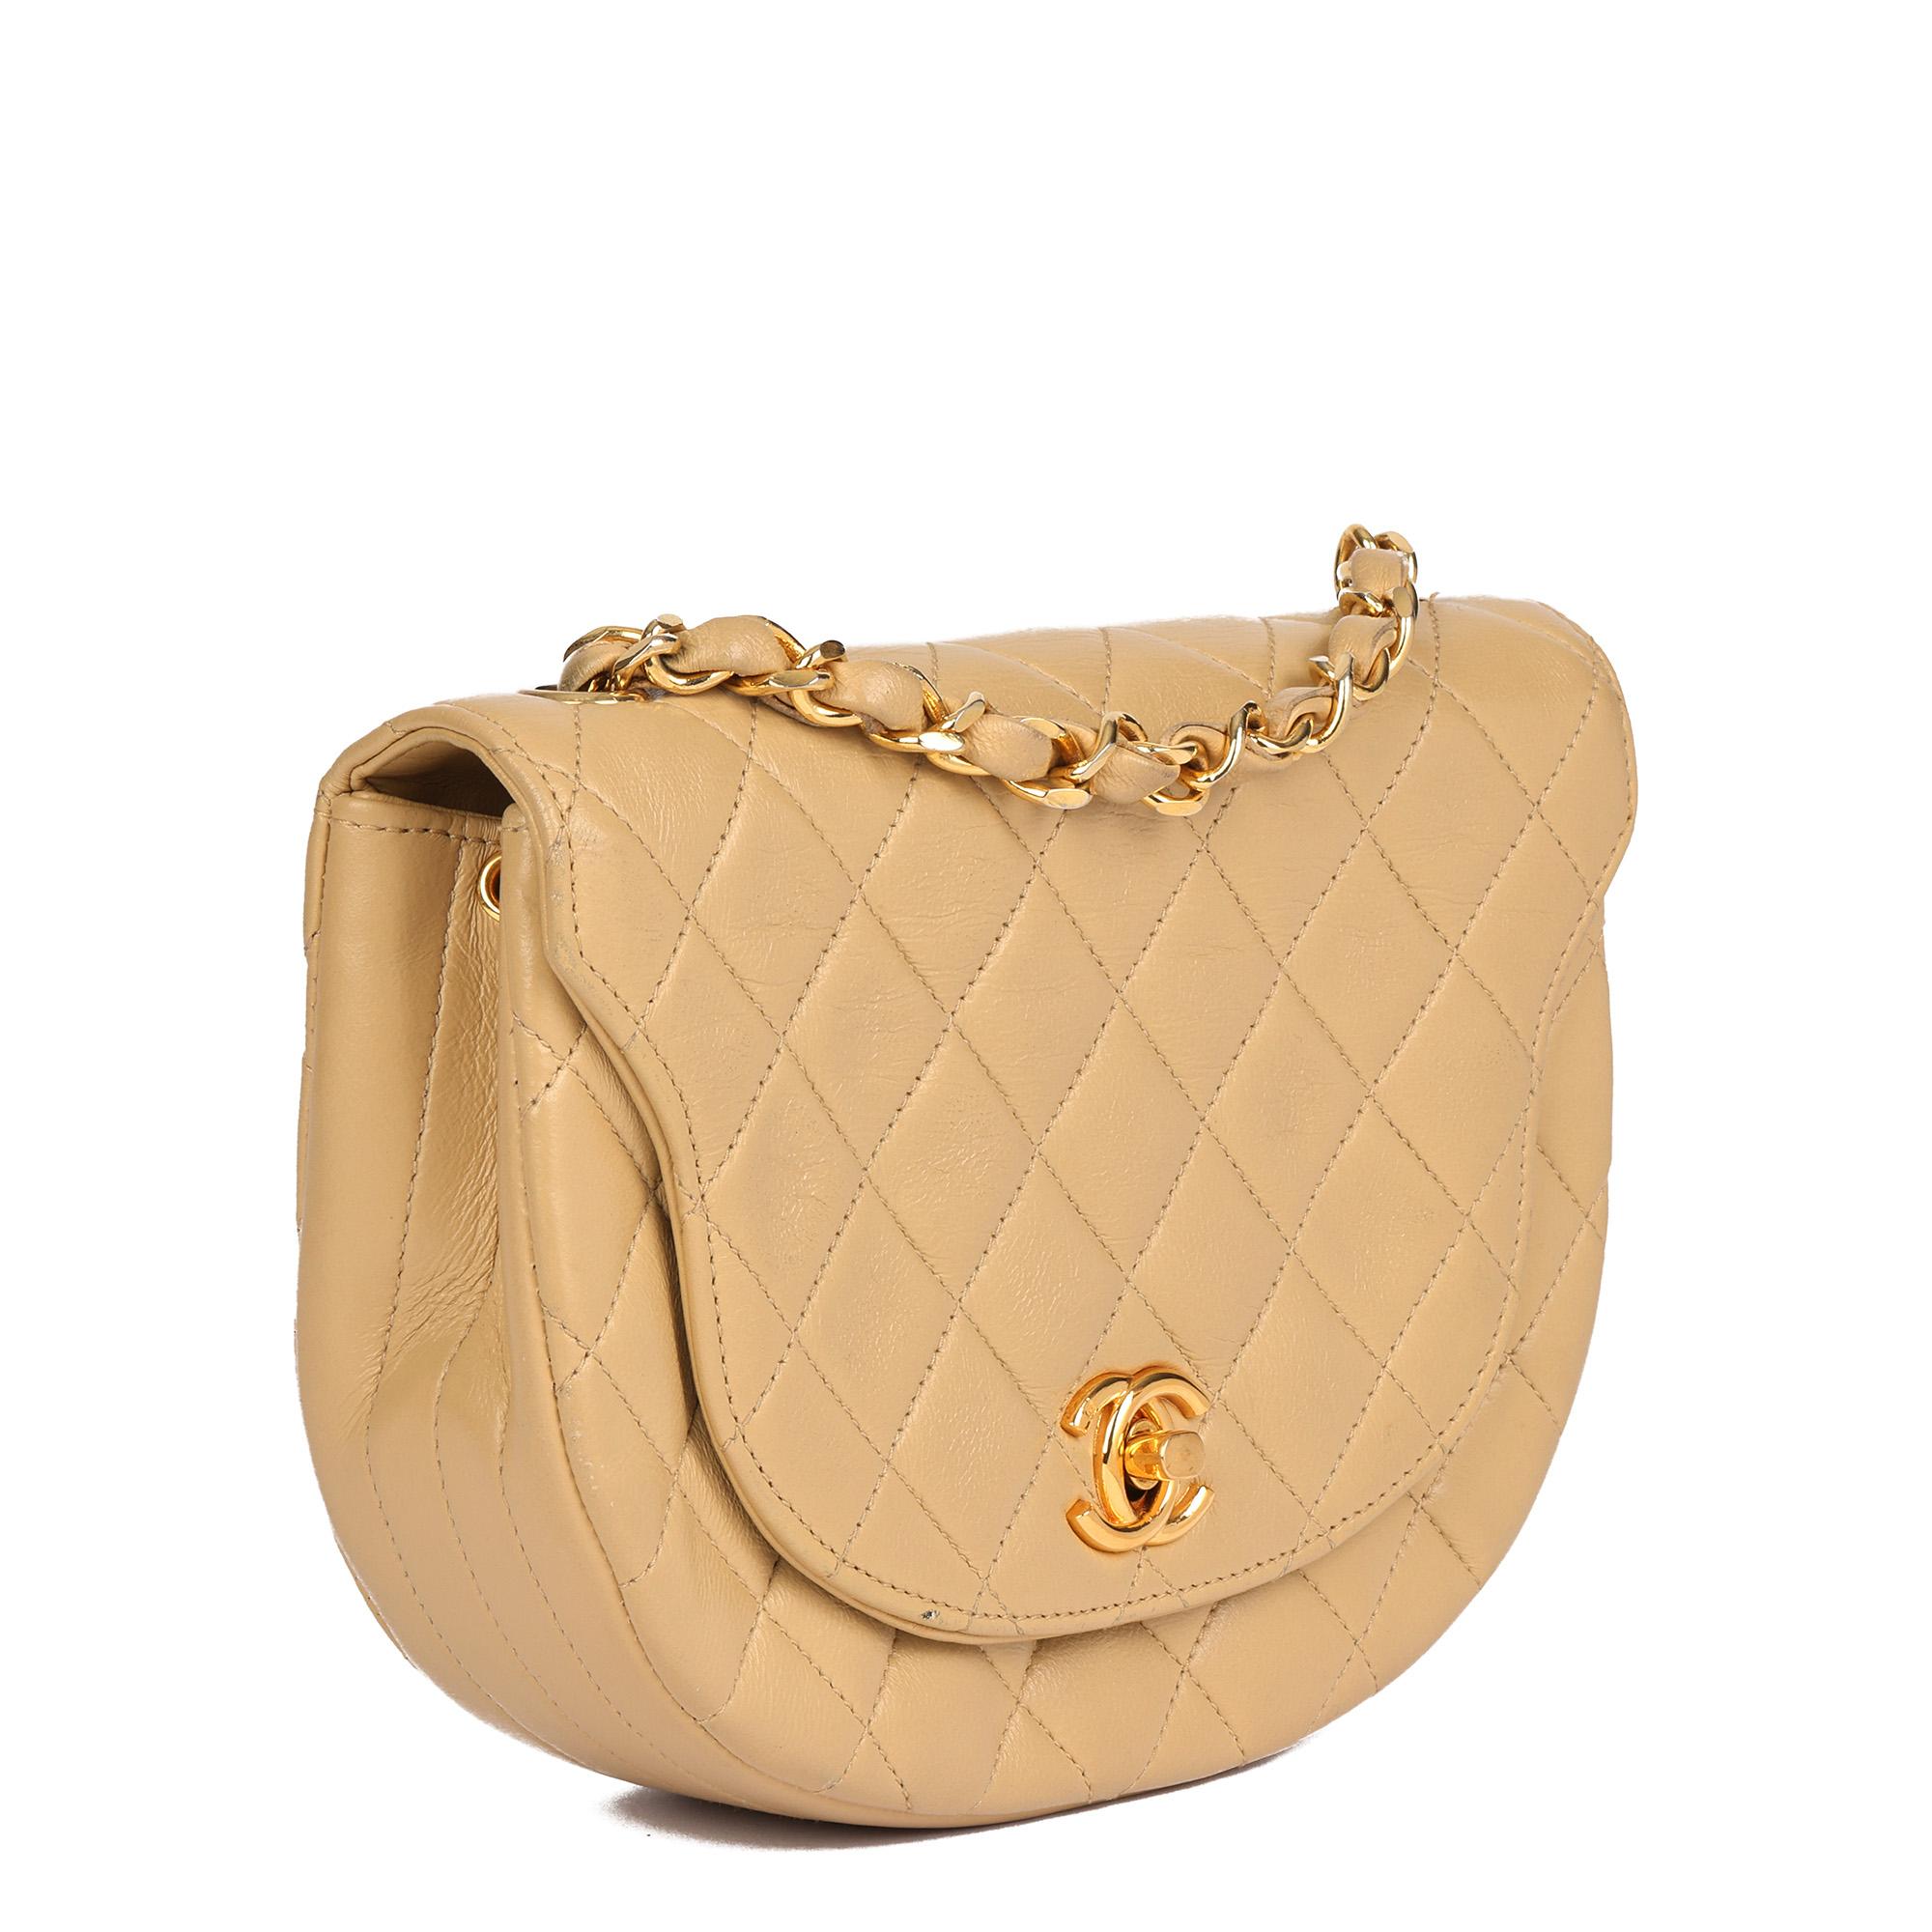 CHANEL
Beige Quilted Lambskin Vintage Half Moon Mini Flap Bag 

Serial Number: 0605447
Age (Circa): 1989
Accompanied By: Authenticity Card
Authenticity Details: Authenticity Card, Serial Sticker (Made in France)
Gender: Ladies
Type: Shoulder,